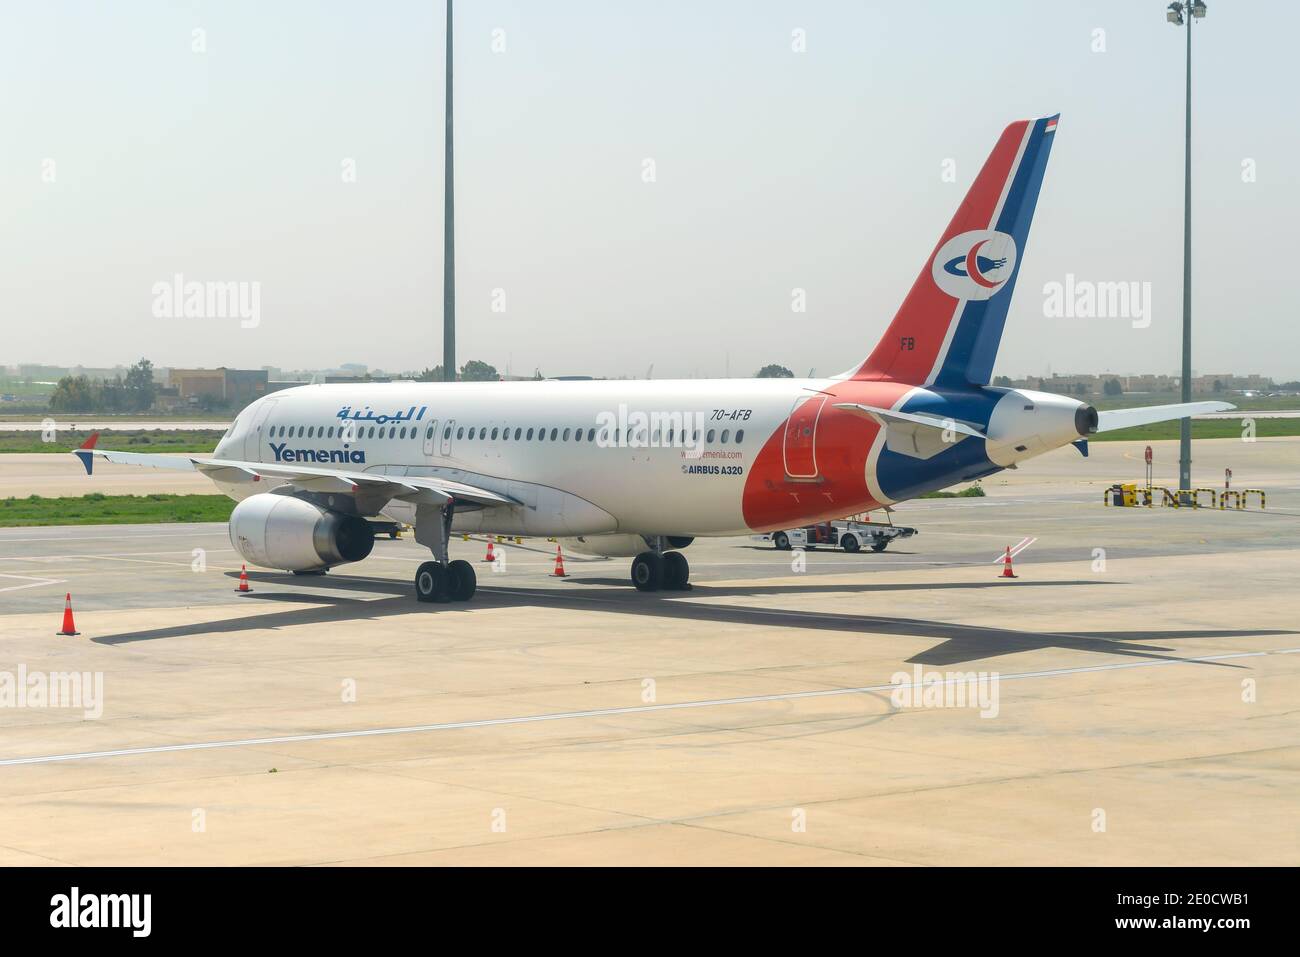 Yemenia Airlines Airbus A320. Yemen Airways airline, based in Sana'a and Aden Airport. Airline with a tumultuous recent history due to conflicts. Stock Photo